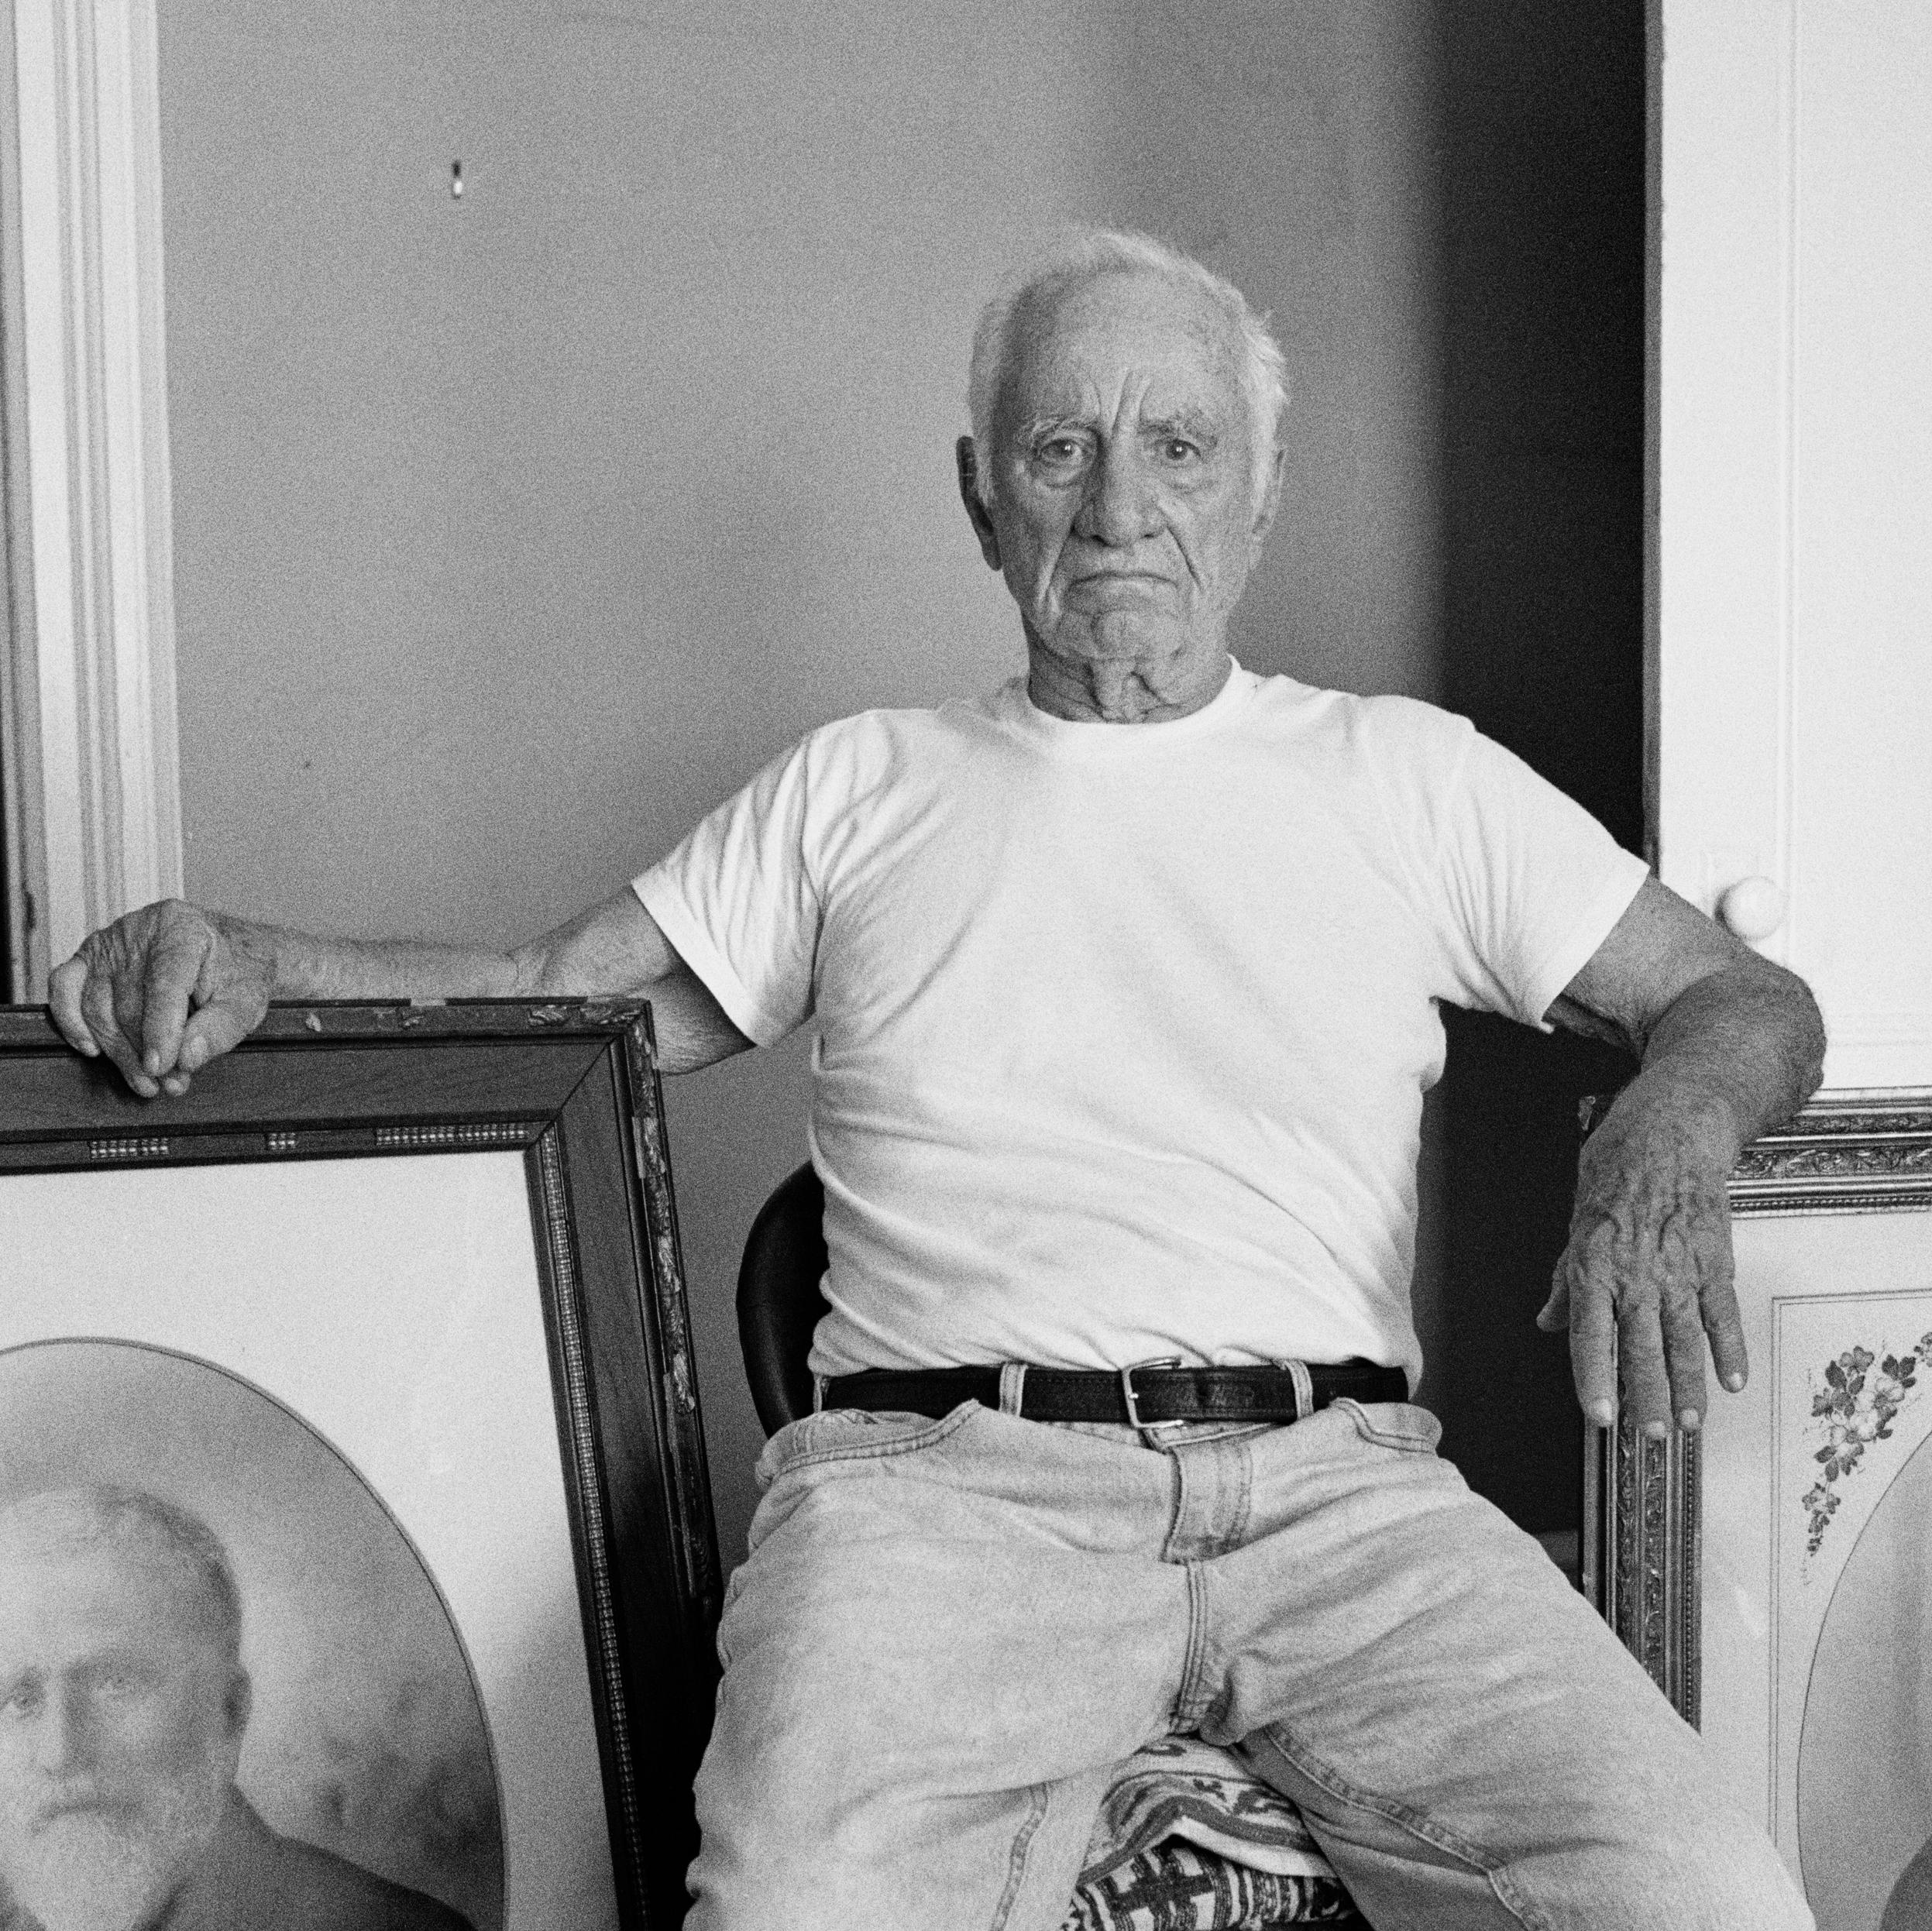 Elia Kazan with portraits of his forebears, at home in New York, 28 June 1999 - Photograph by Jonathan Becker